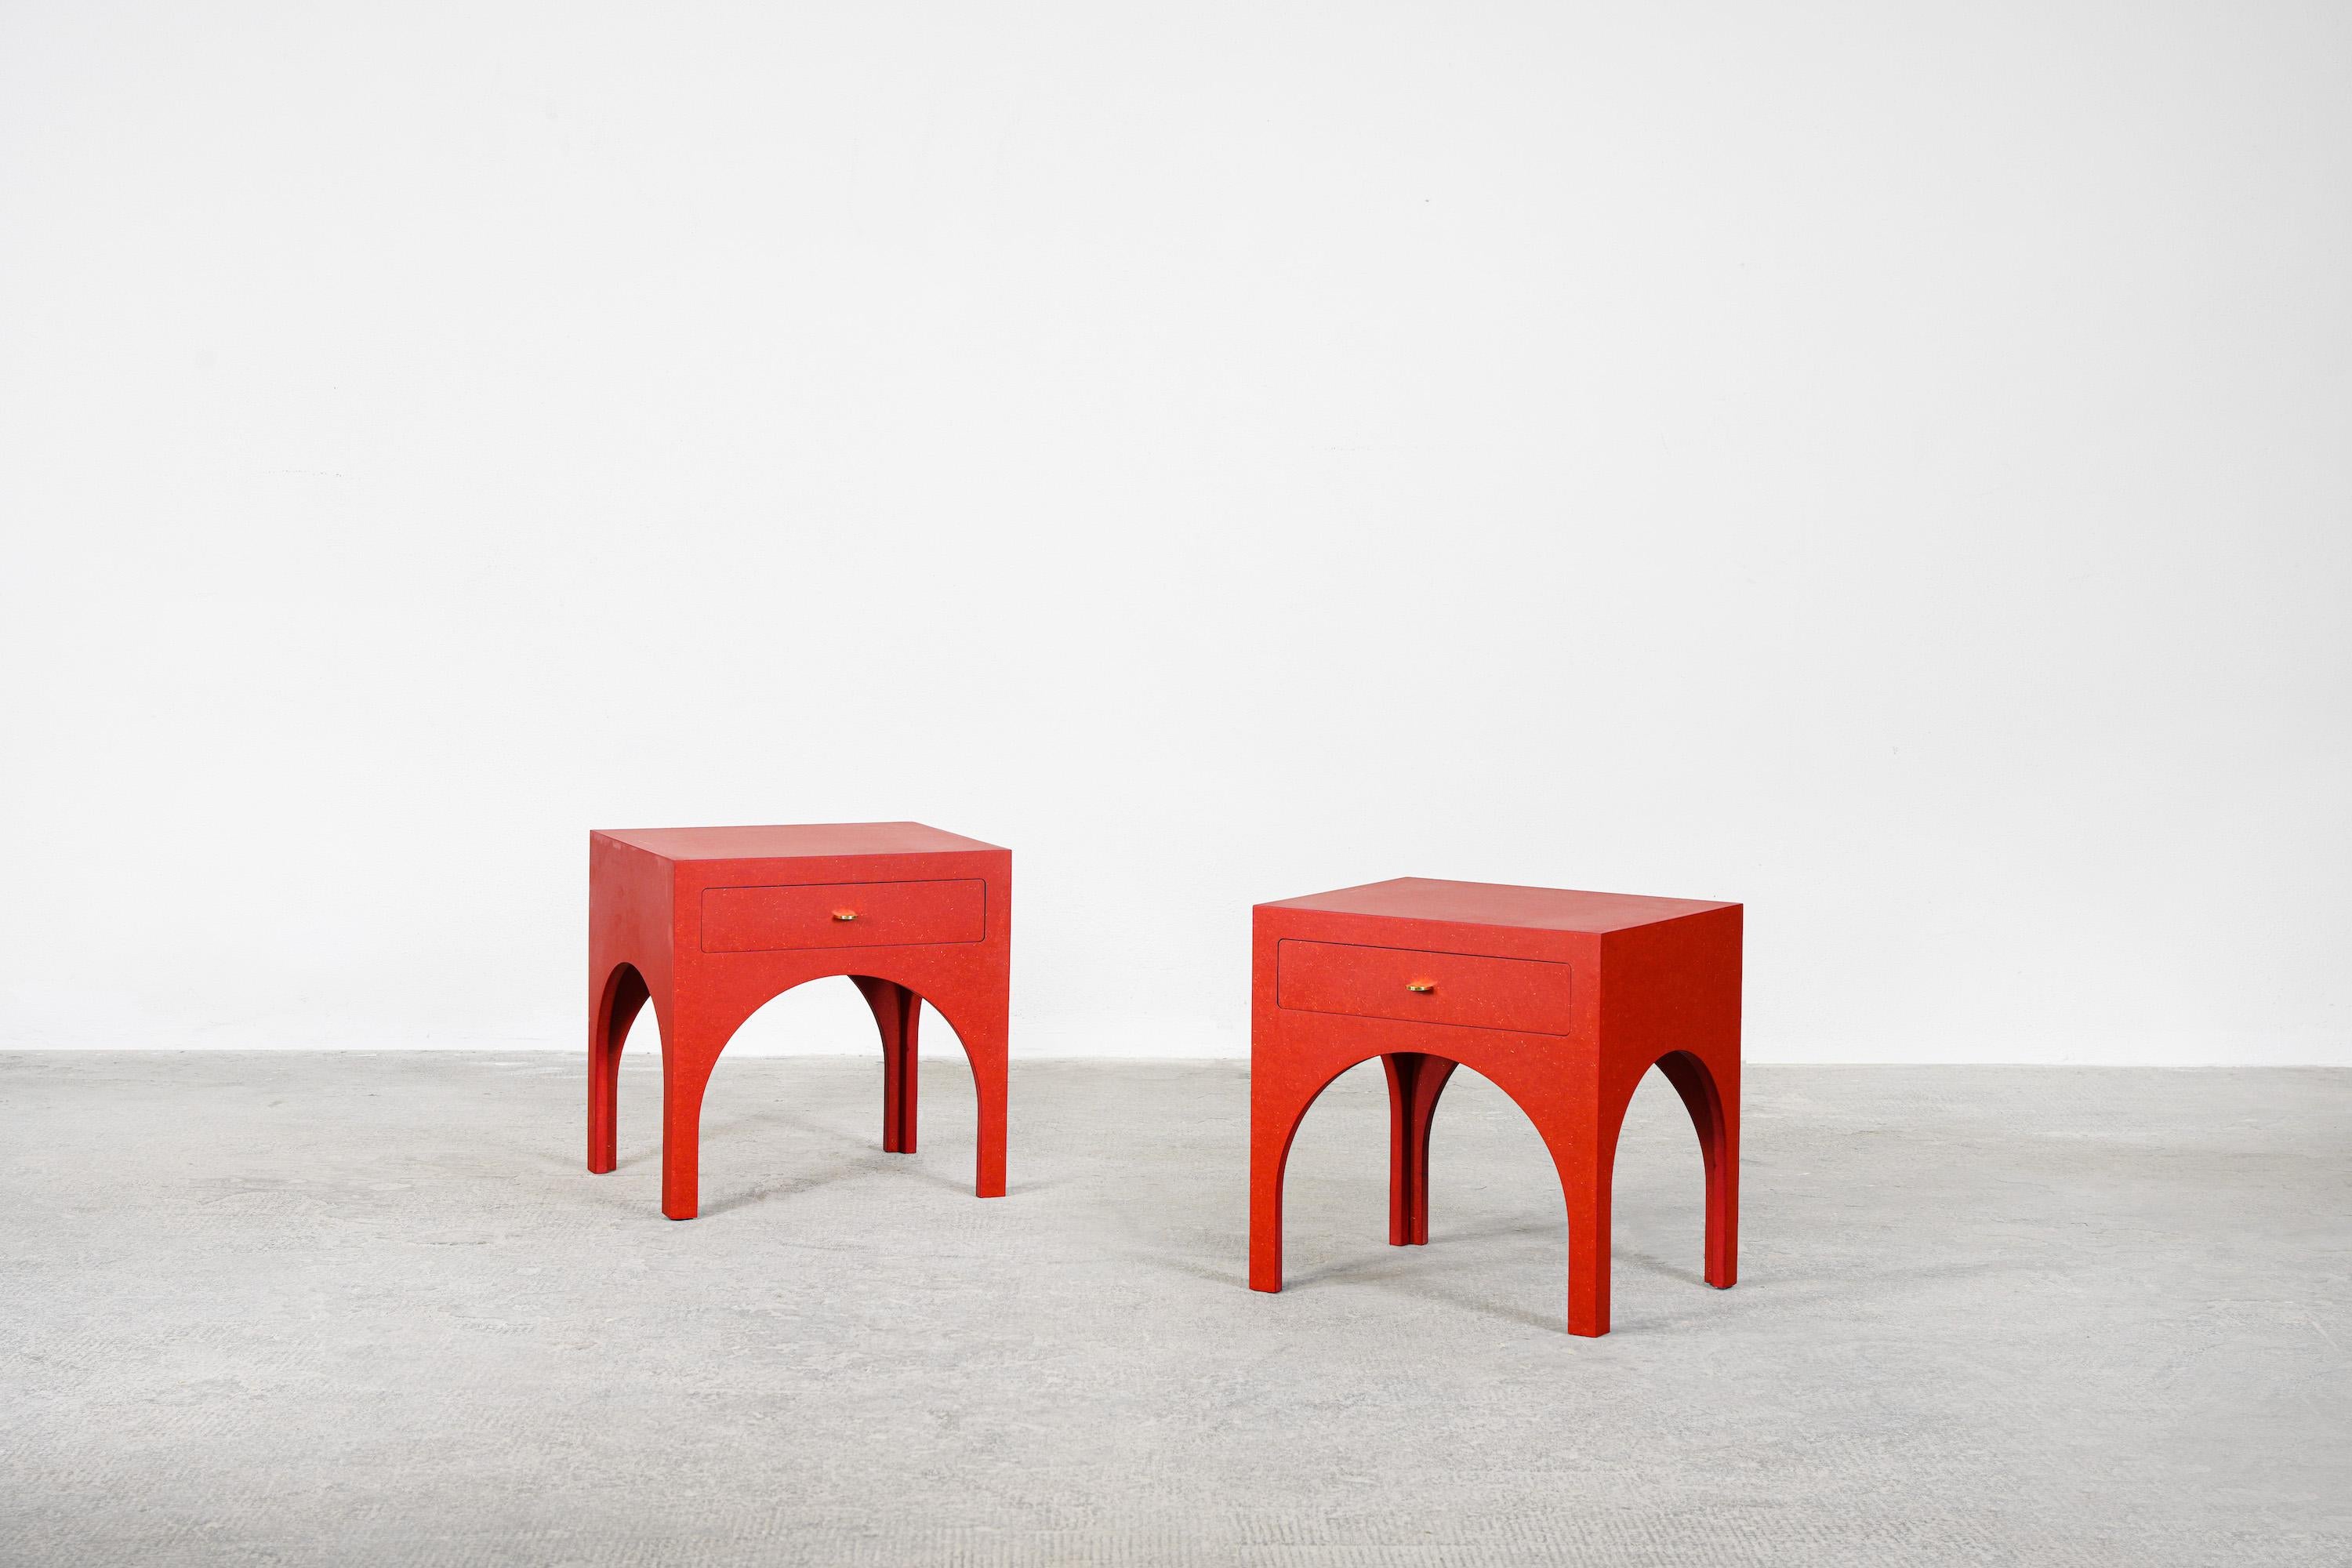 A beautiful pair of red side tables/nightstands designed by Yuzo Bachmann for Atelier Bachmann, handcrafted in Germany, 2019.
These nightstands are made out of red valchromat and polished brass handles. Finished with natural furniture